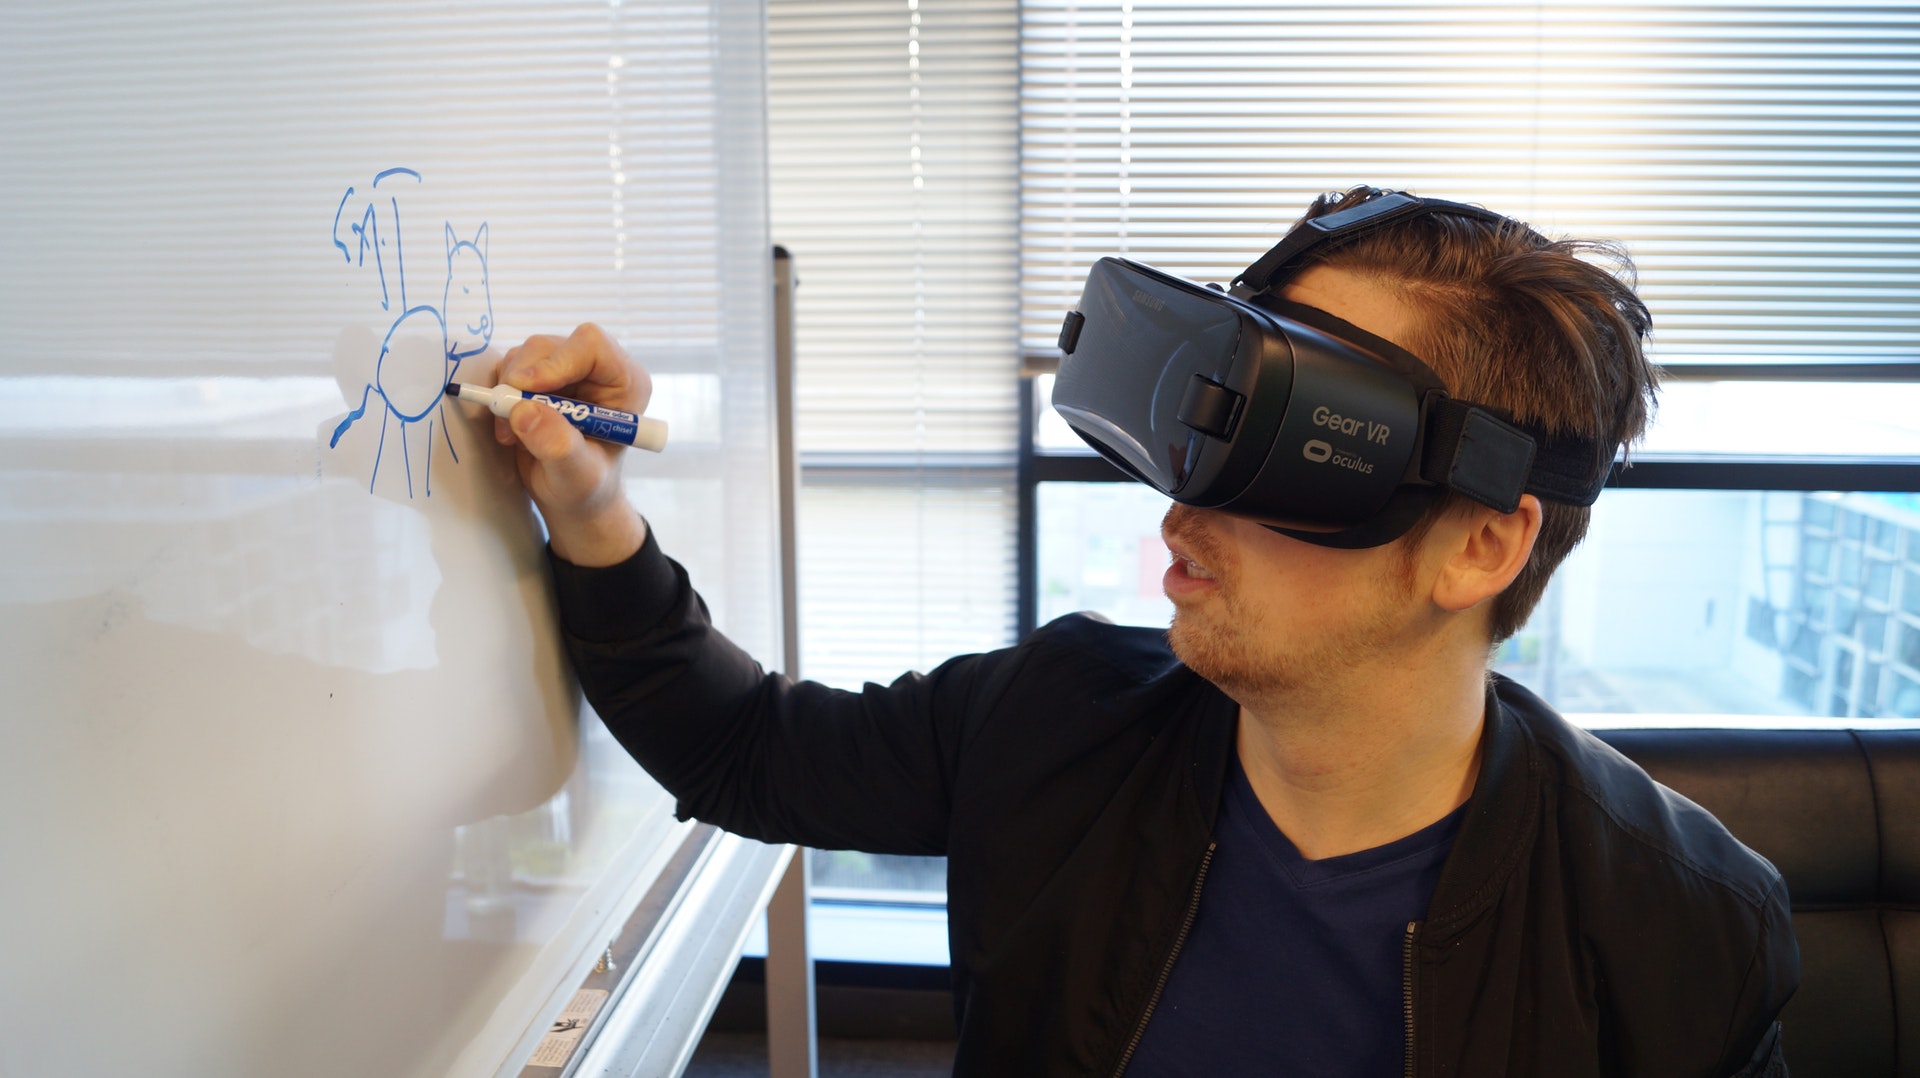 Noticeably better training outcomes with Virtual Reality -theentertainment.vision